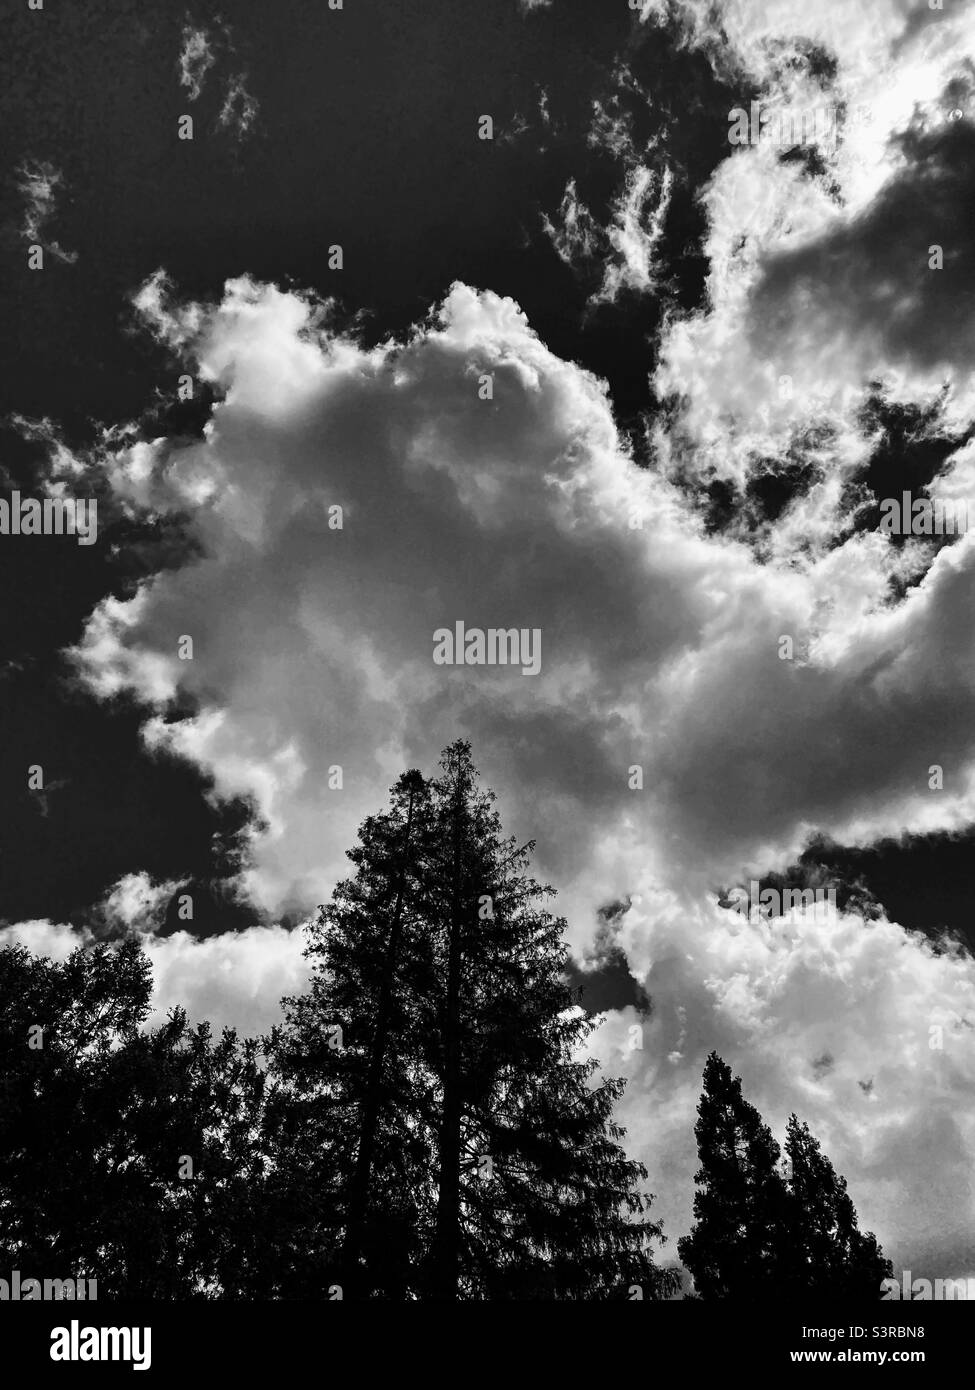 White, puffy clouds with trees in foreground, in black and white Stock Photo